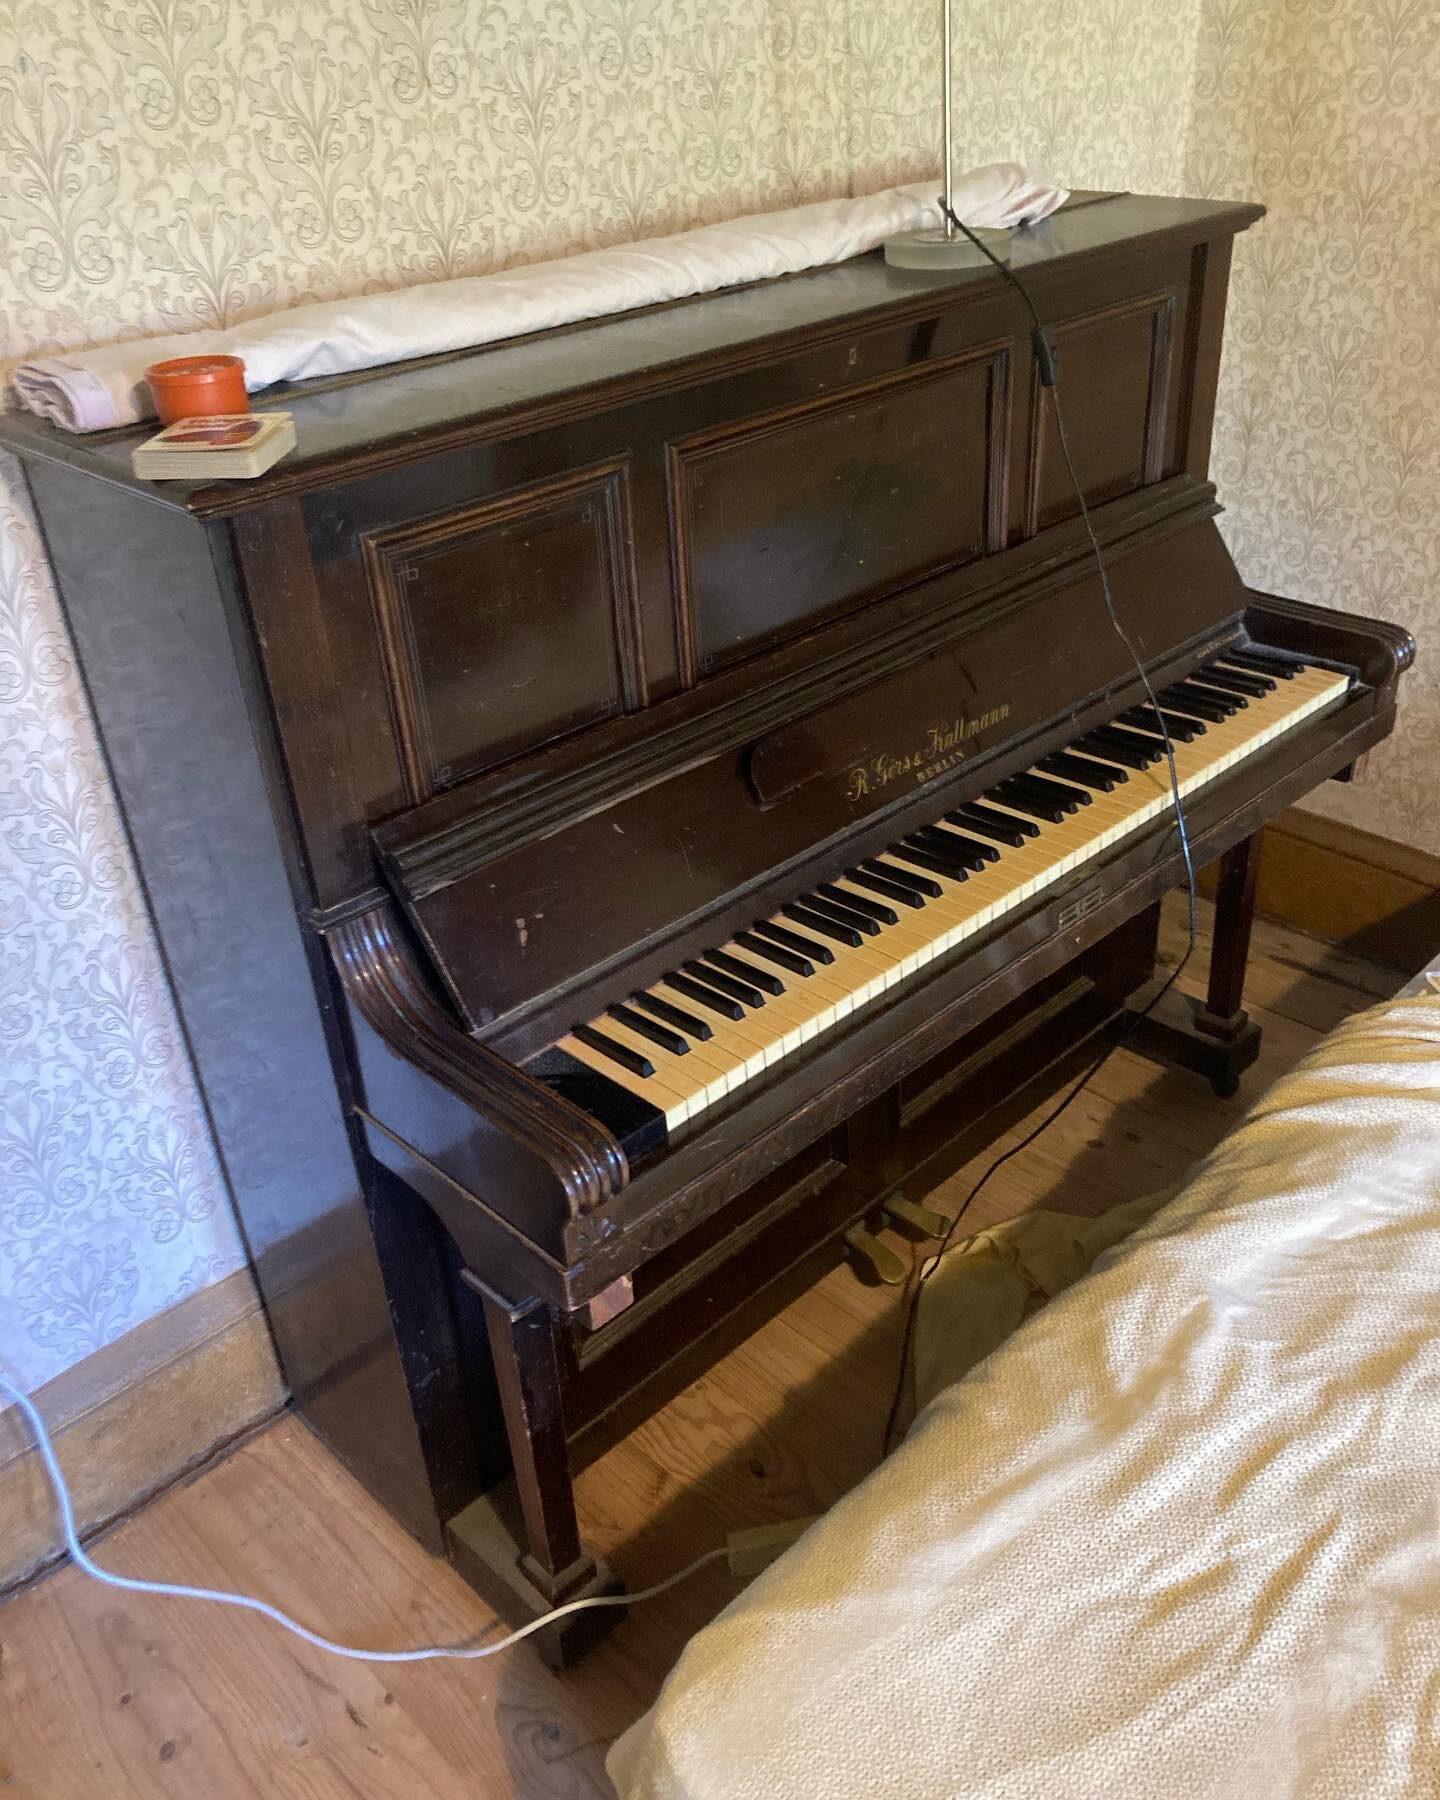 Tick tock tick tock it&rsquo;s piano oh clock here we go again WHO WANTS THIS MELODY MAKER? All the keys work and it sounds nice but it&rsquo;ll need a good tune. Same as always, first in best dressed FREE PIANO FREE DELIVERY. Gotta be in the Castlem